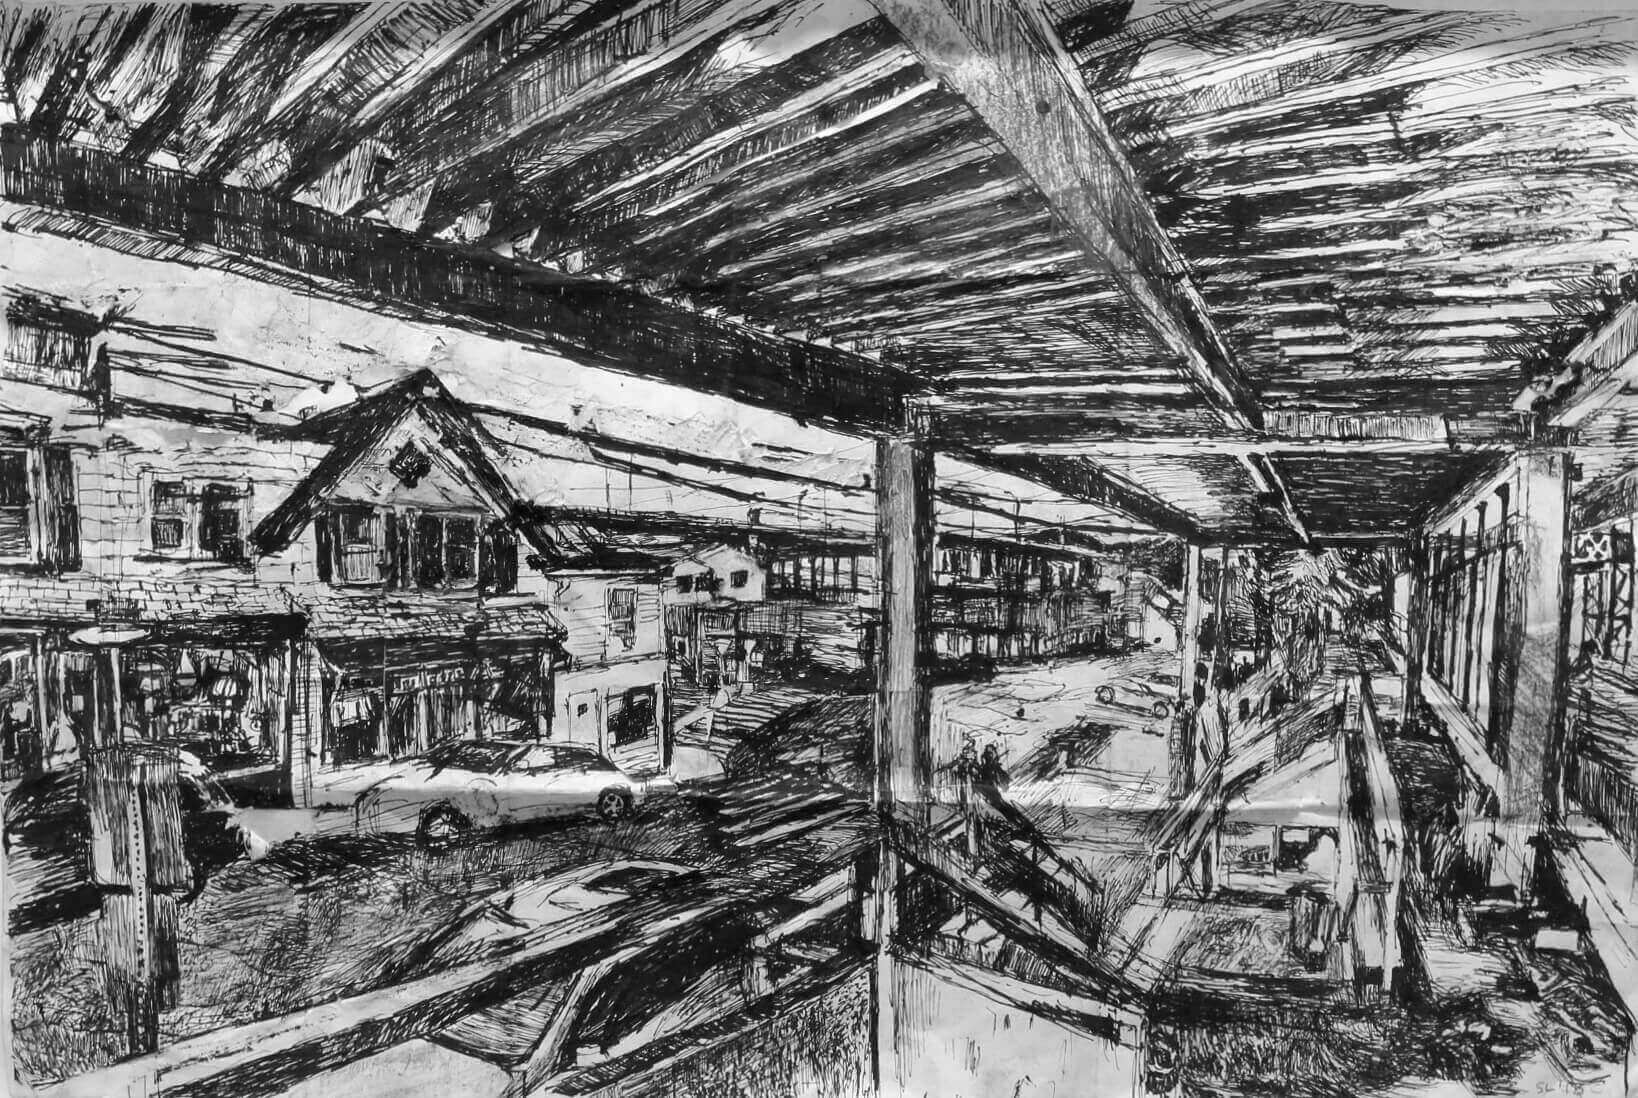 Stanley Lewis, Westport Train Station, 2013, ink on paper, 16 x 23.5 inches (From the Louis-Dreyfus Family Collection, courtesy of The William Louis-Dreyfus Foundation Inc.)